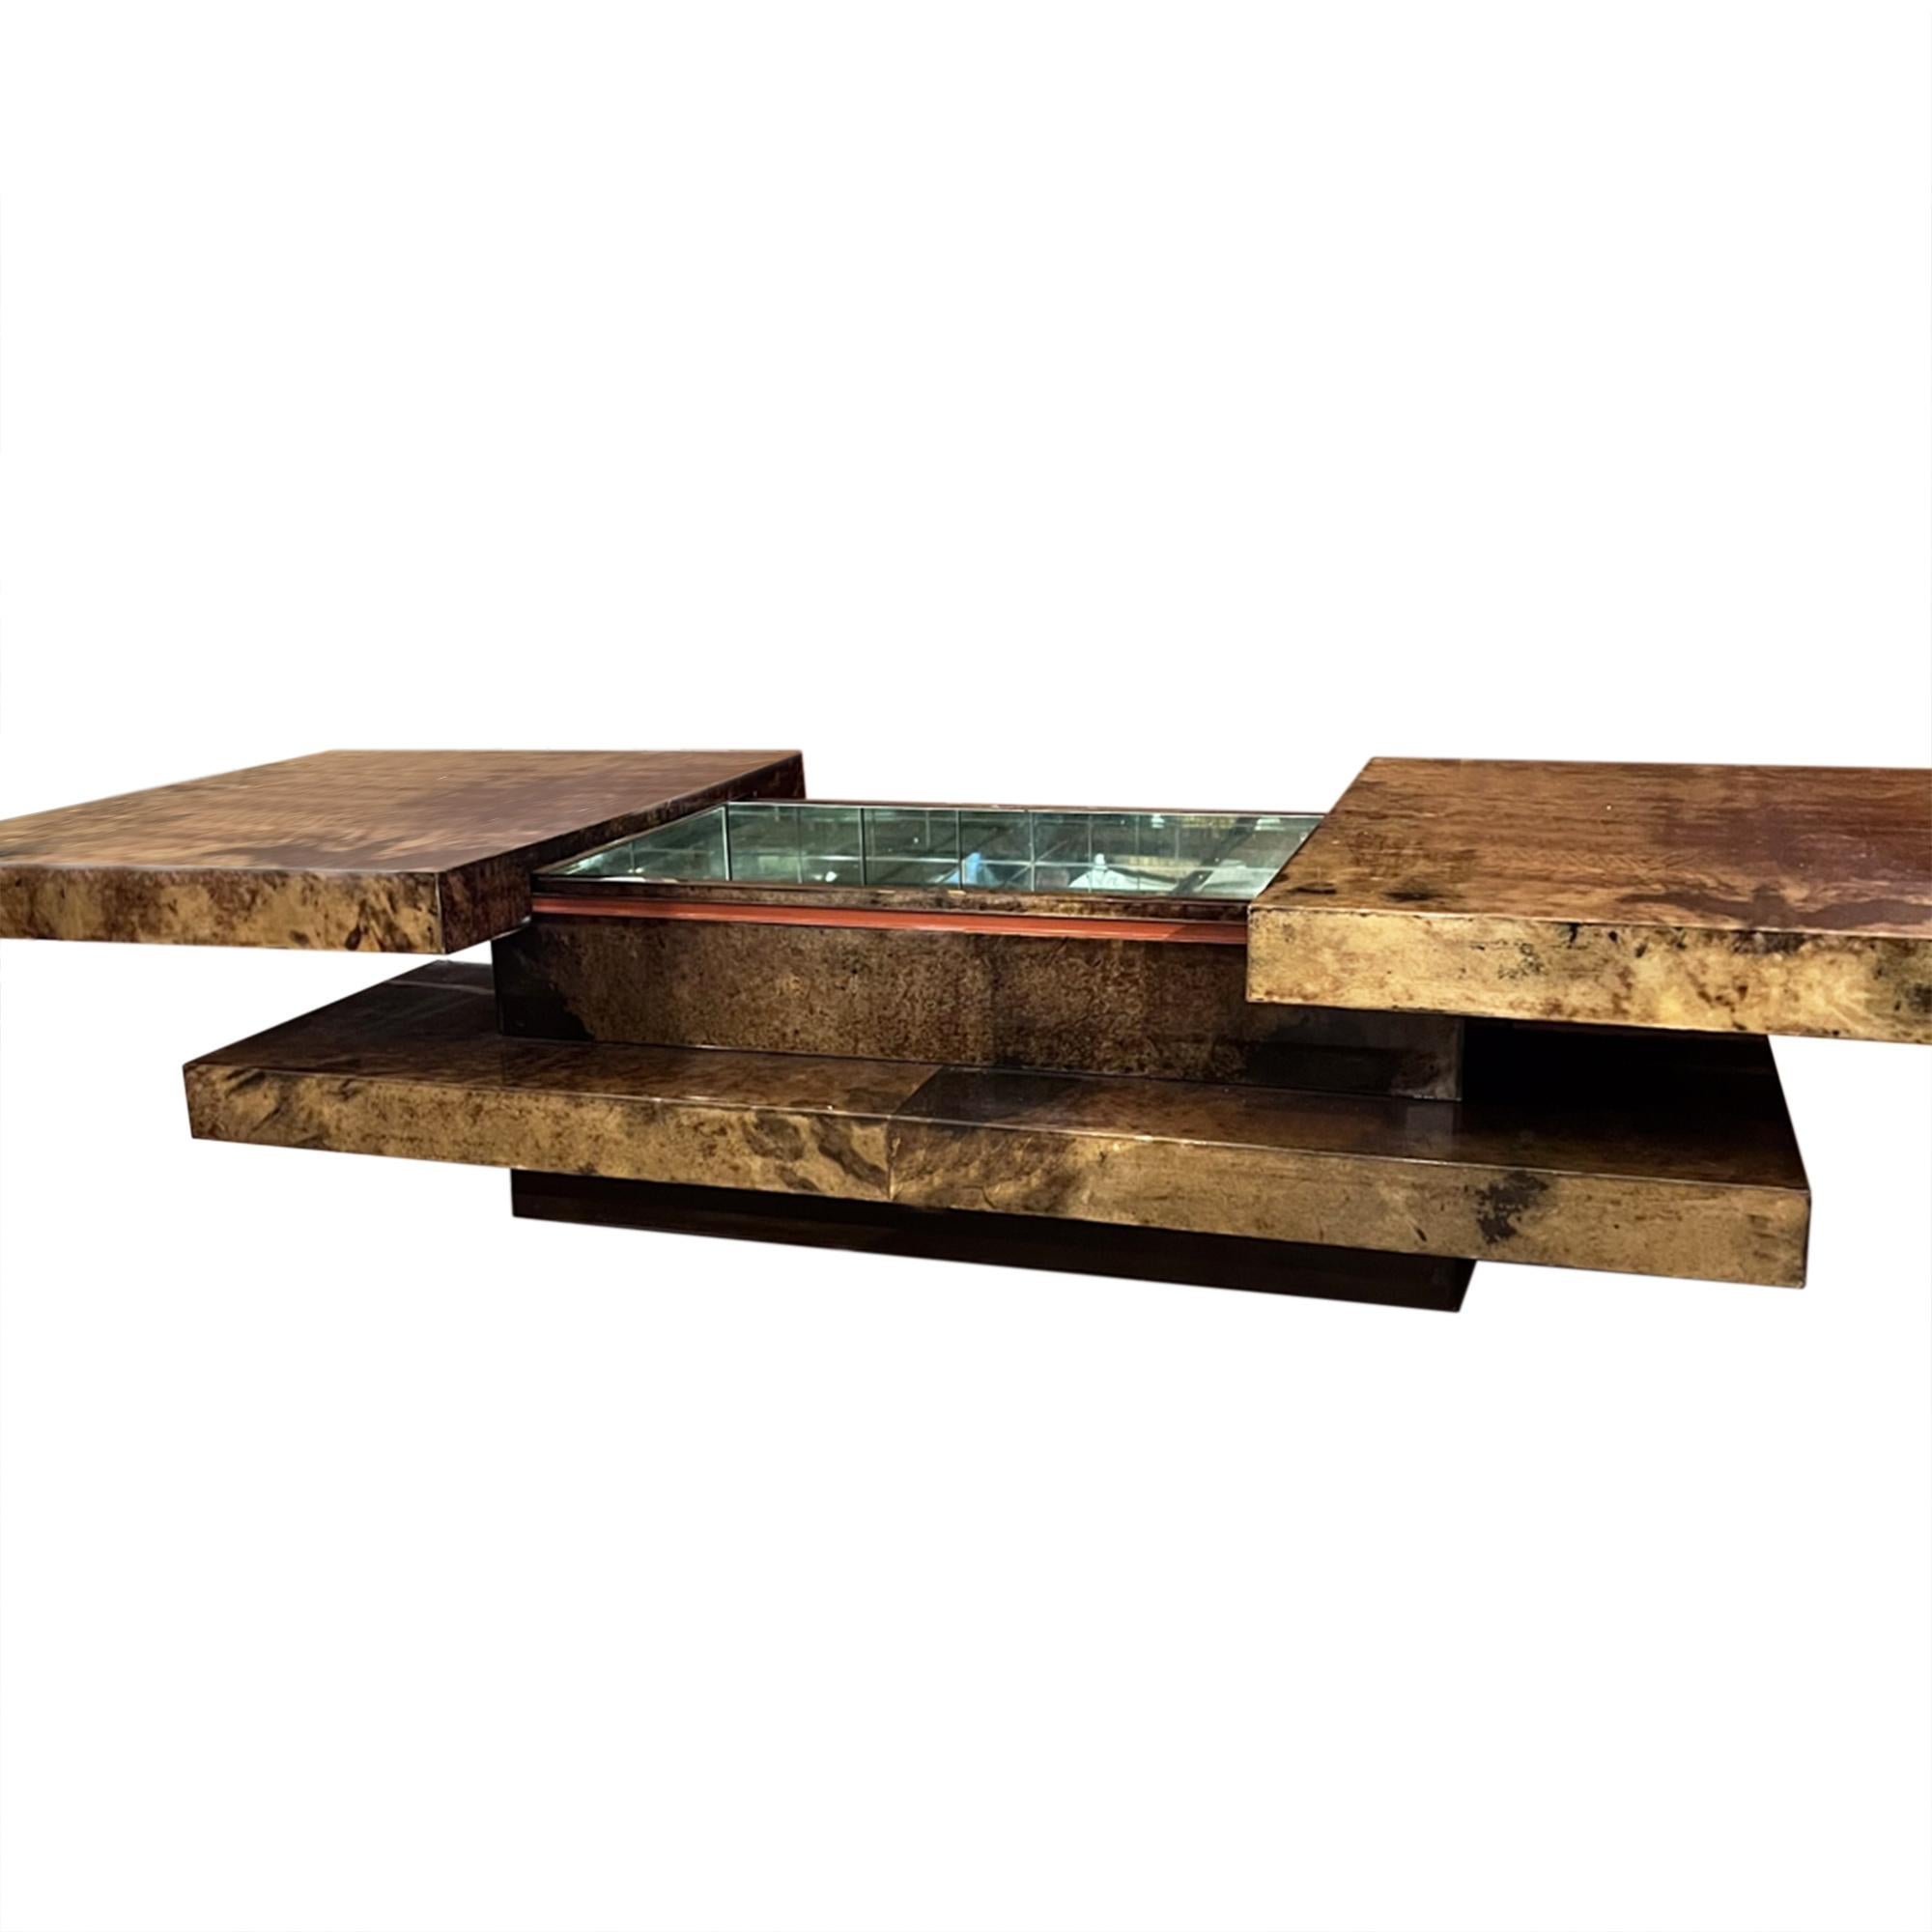 This wonderful lacquered goatskin coffee table was designed in Italy by Aldo Tura. His use of goatskin makes each piece unique with the pattern of the hide.

This is a large model - if you're looking for a smaller one - do get in touch as we